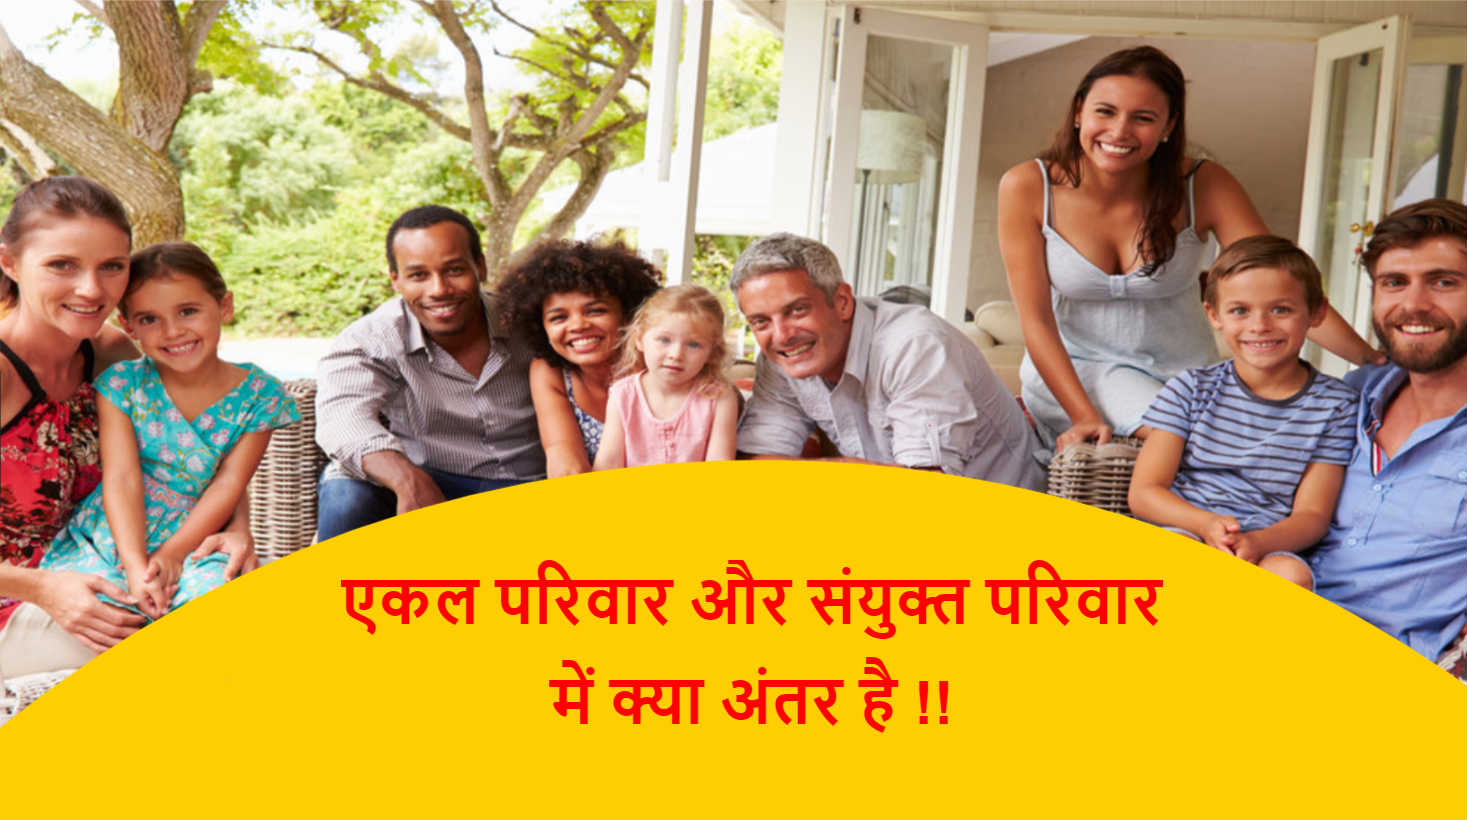 You are currently viewing (Joint & Nuclear) (Small & Large) family एकल परिवार और संयुक्त परिवार में अंतर !!